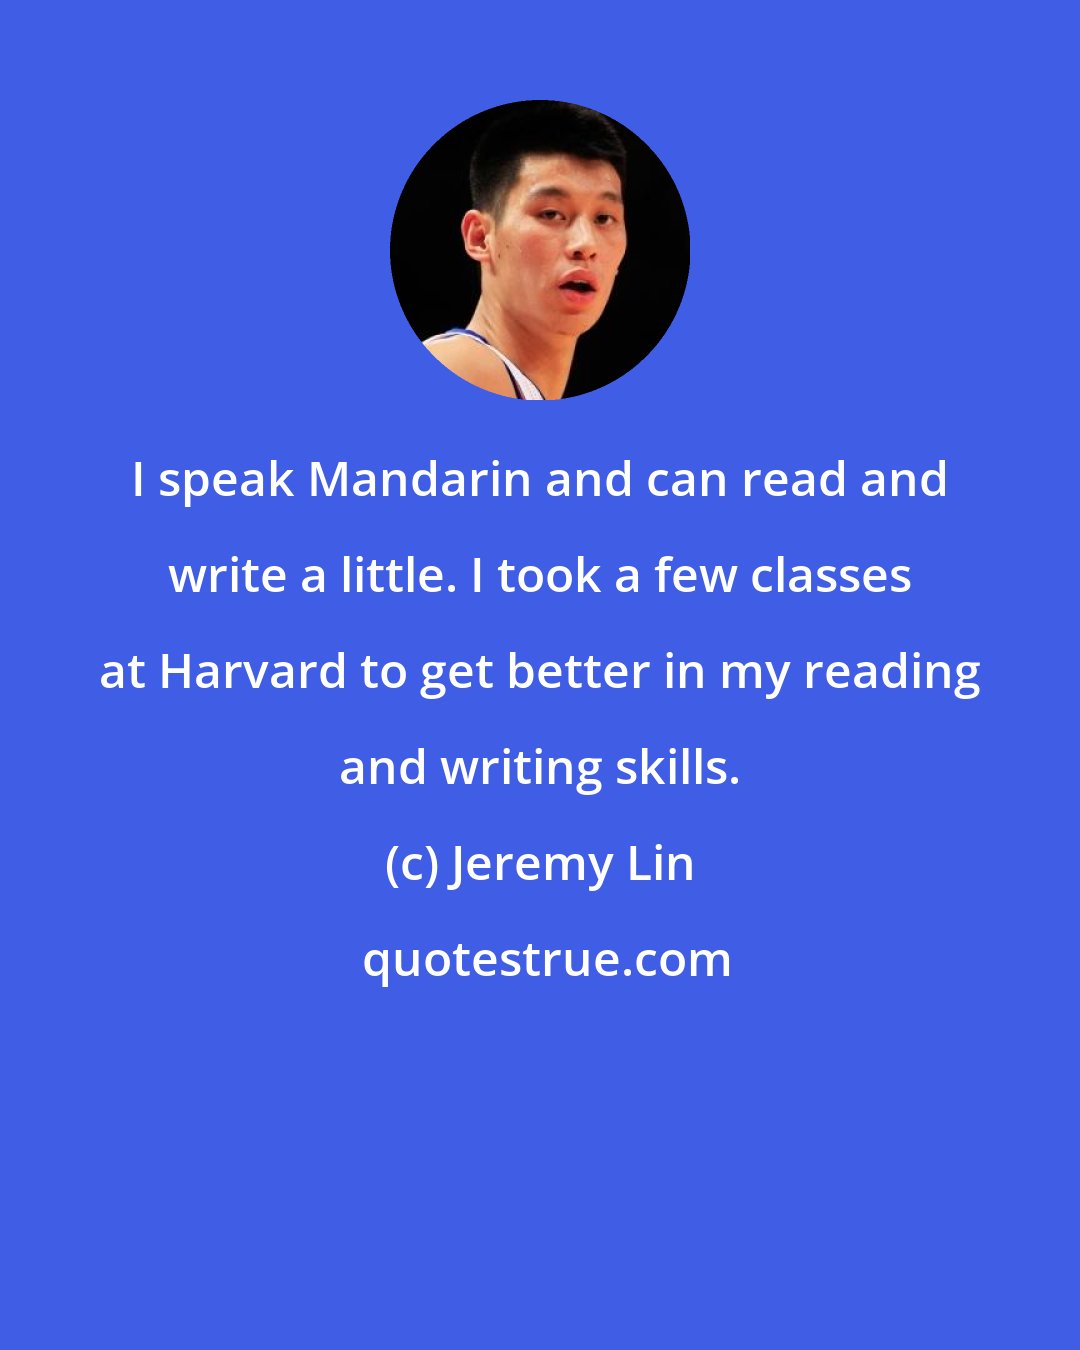 Jeremy Lin: I speak Mandarin and can read and write a little. I took a few classes at Harvard to get better in my reading and writing skills.